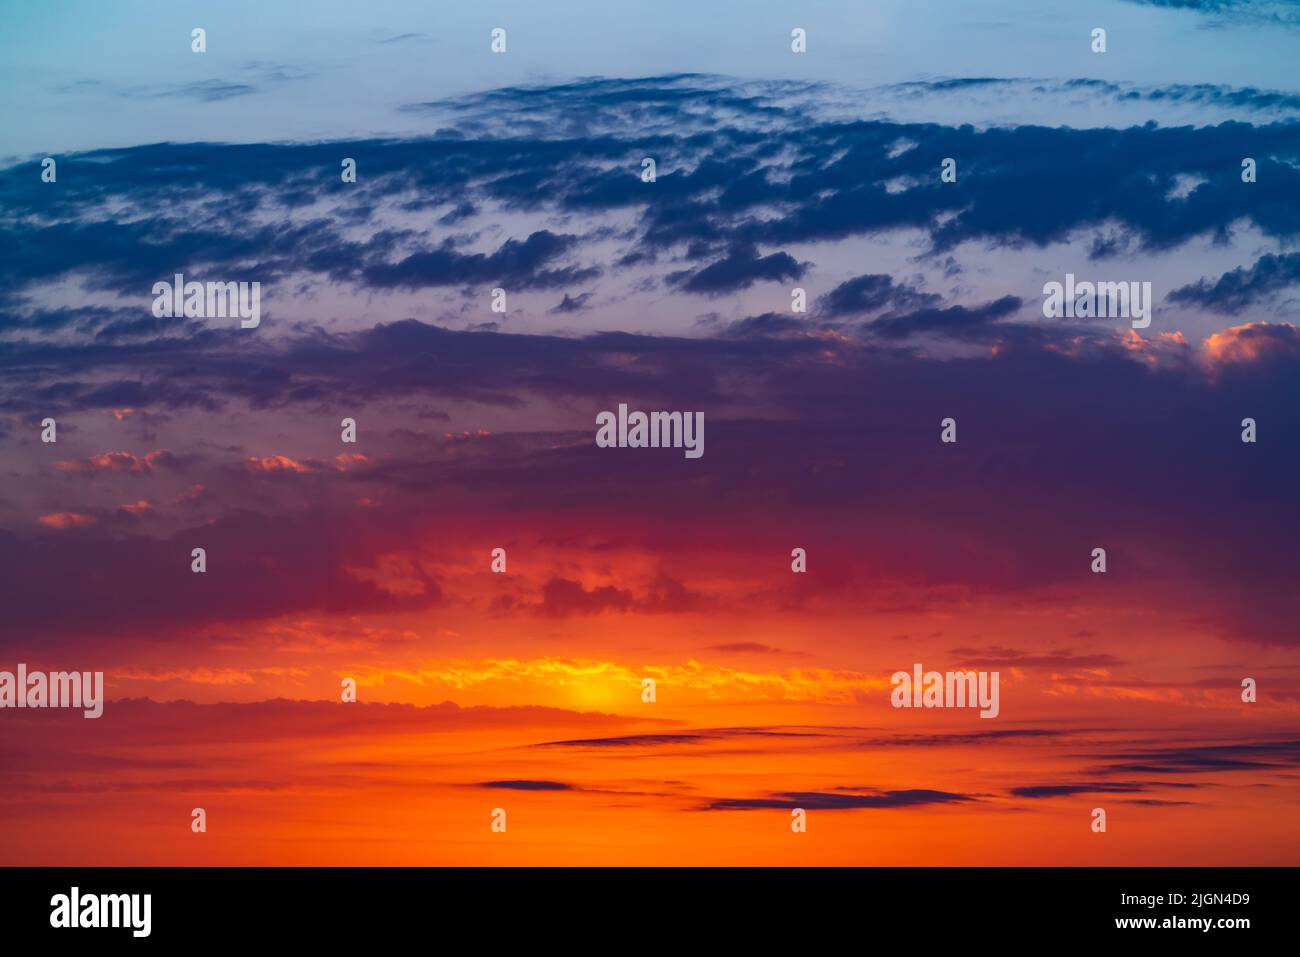 Colorful bright sunset sky background Stock Photo